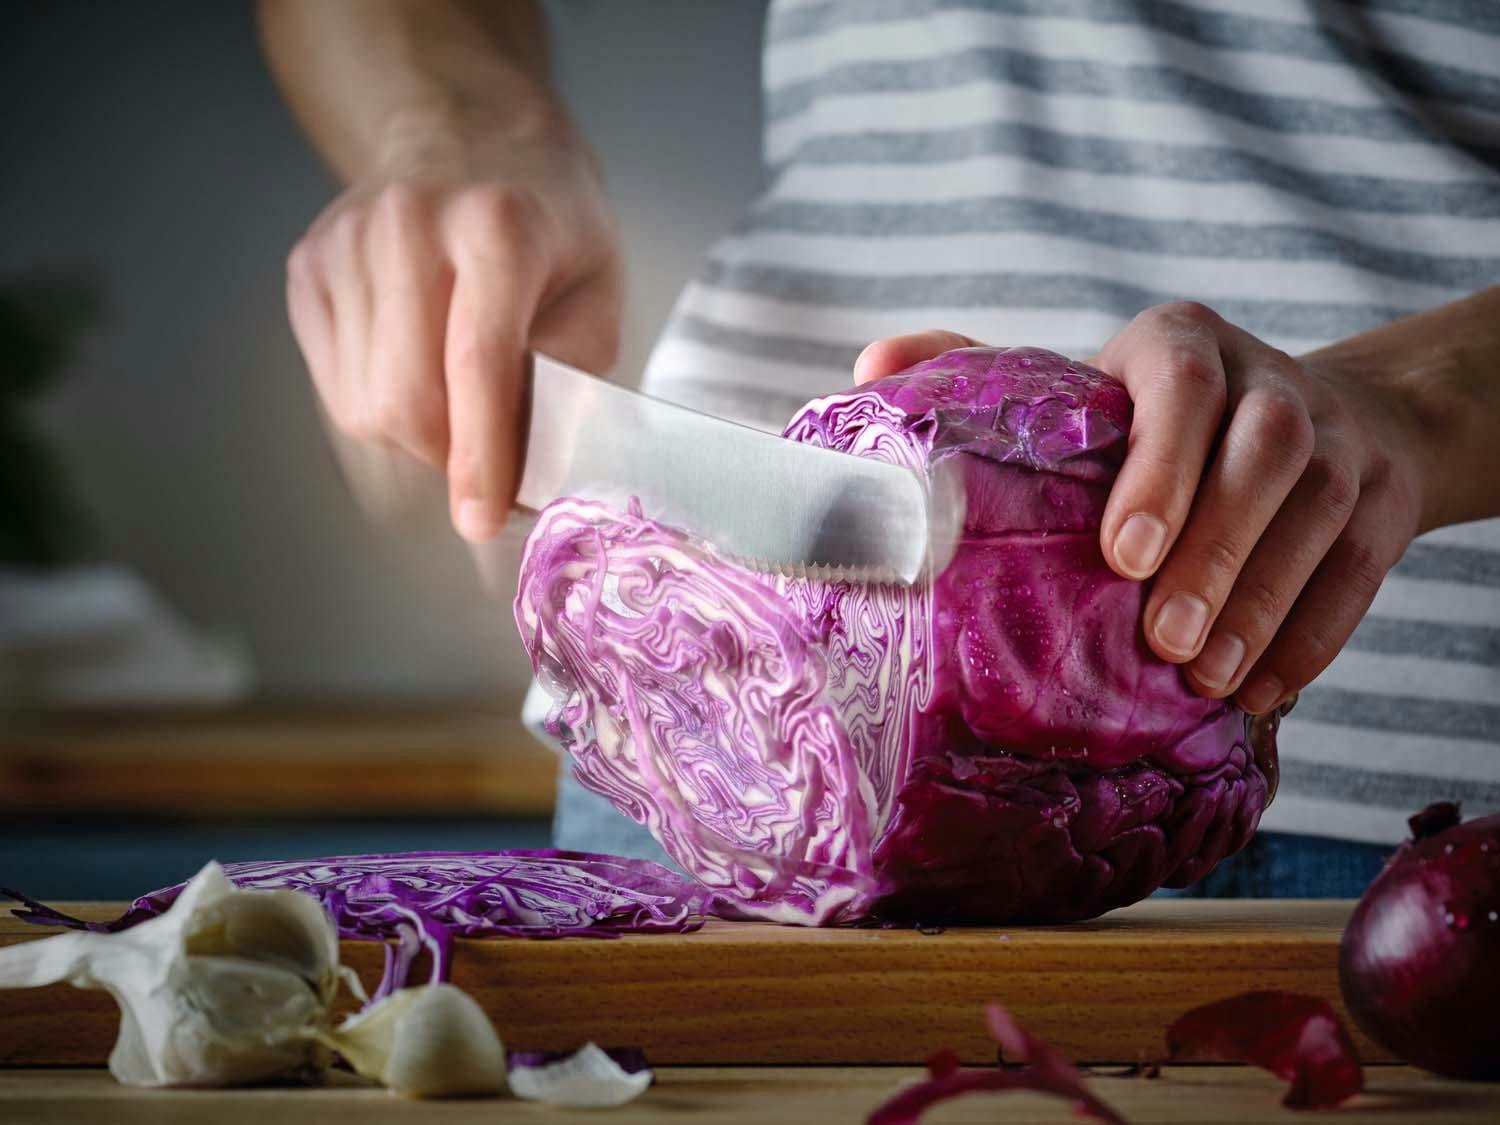 gourmet chef slicing cabbage